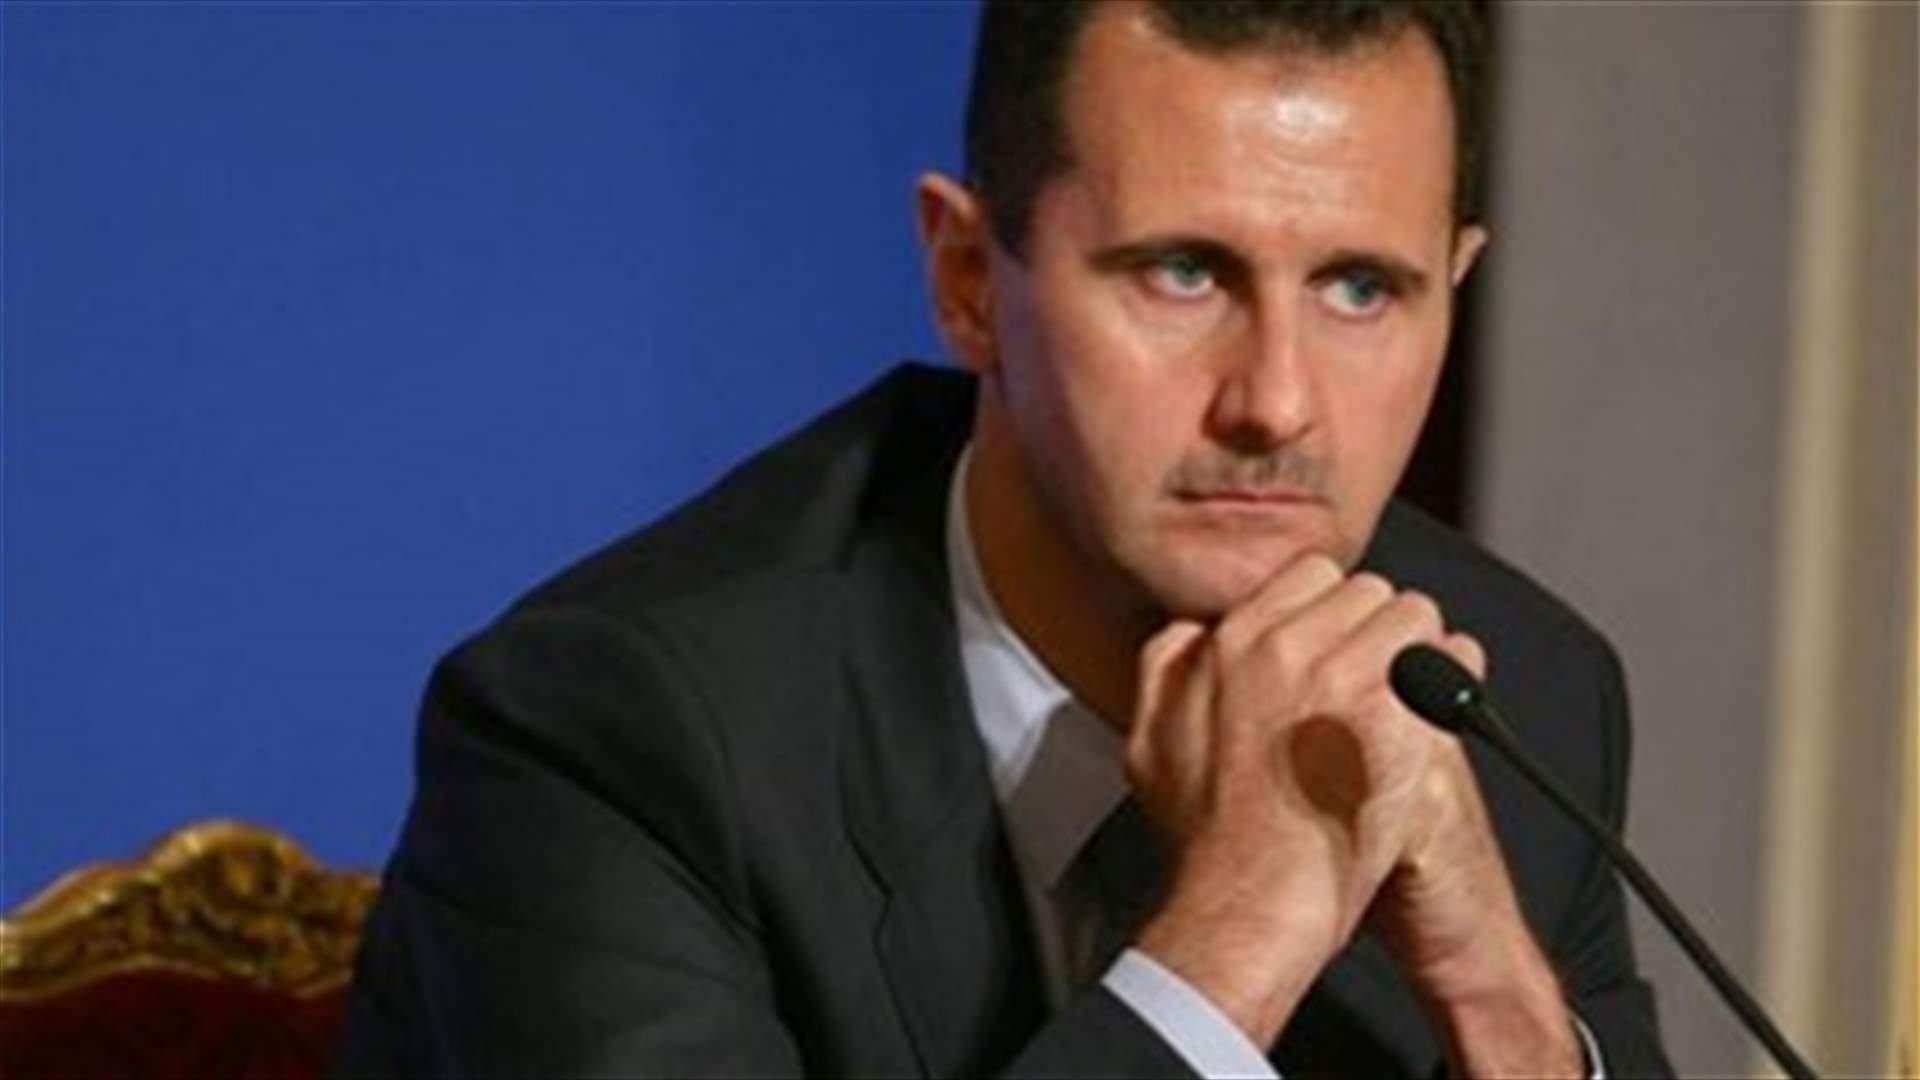 Assad tasks minister with forming new government - Syria state media